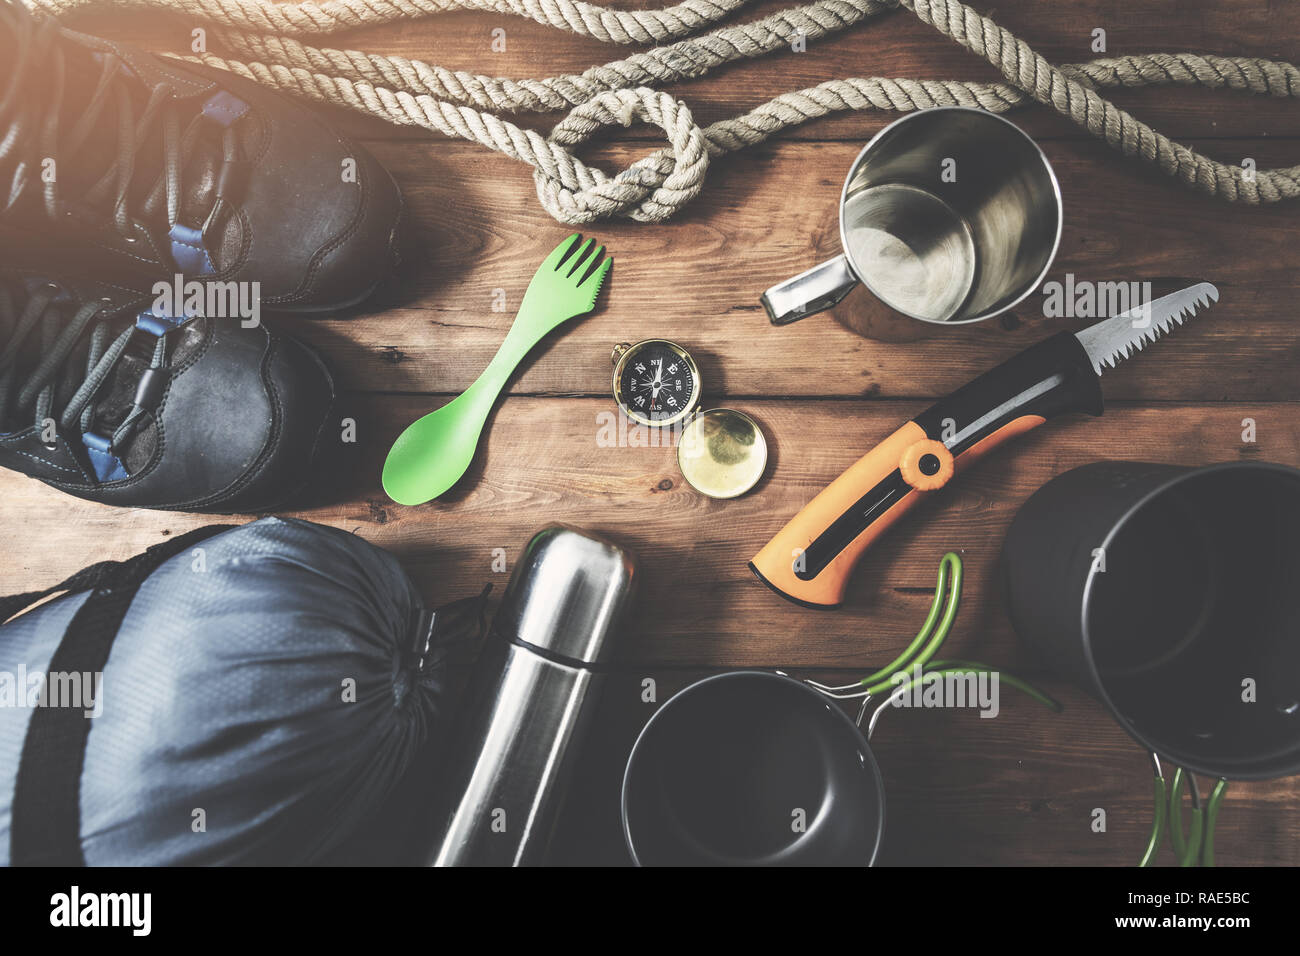 expedition camping equipment on wooden plank background. top view Stock Photo